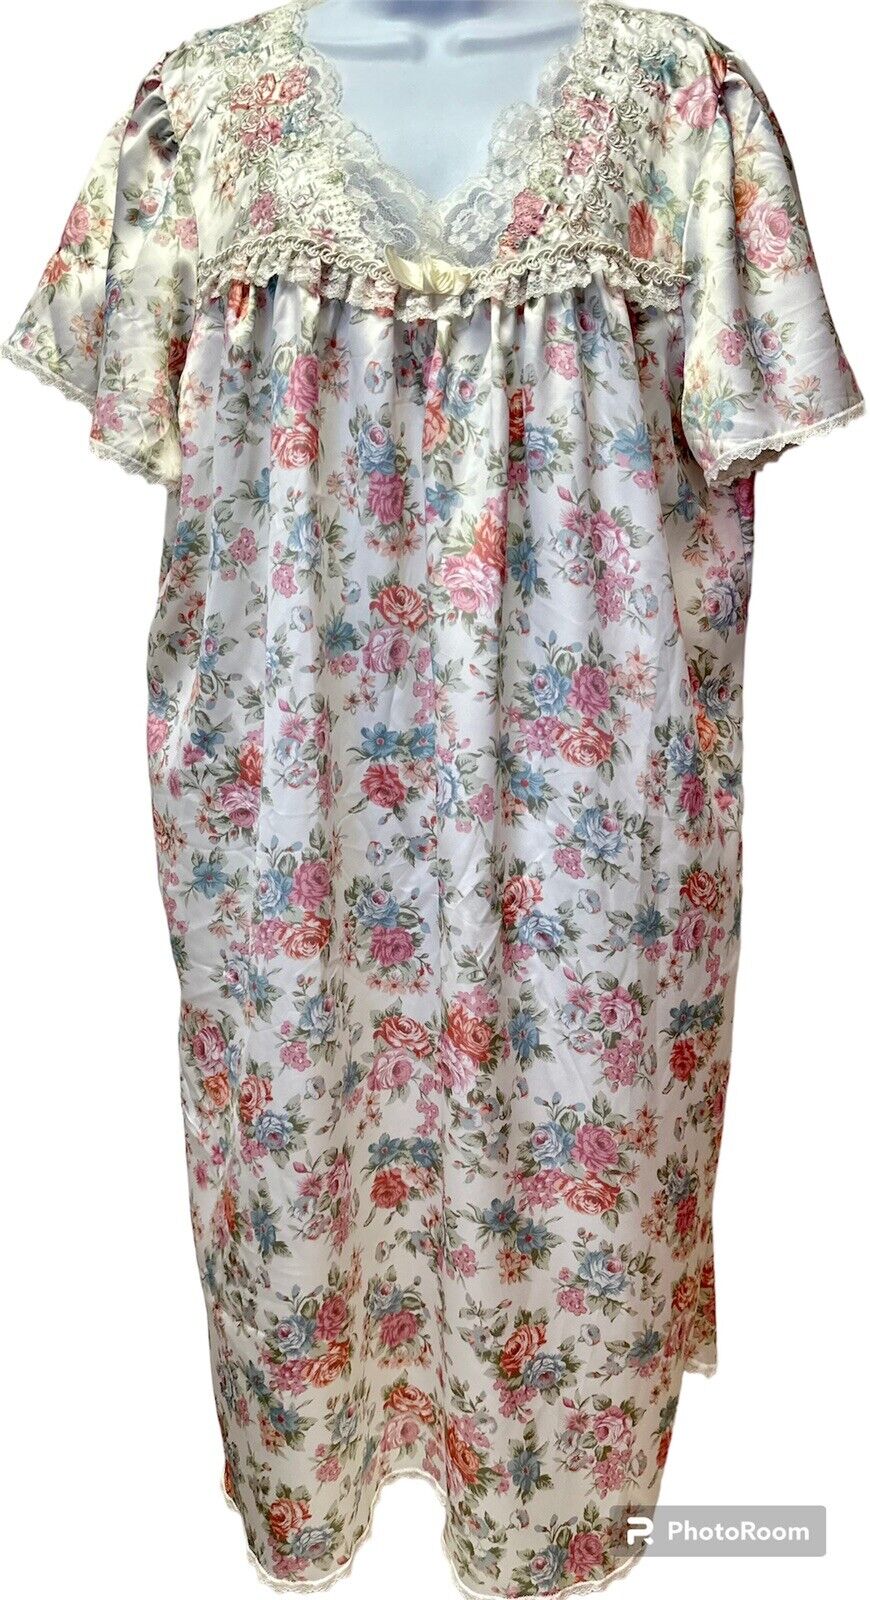 Vintage Miss Elaine XL Satin Night Gown Floral Lace Rosette Short Sleeve USA